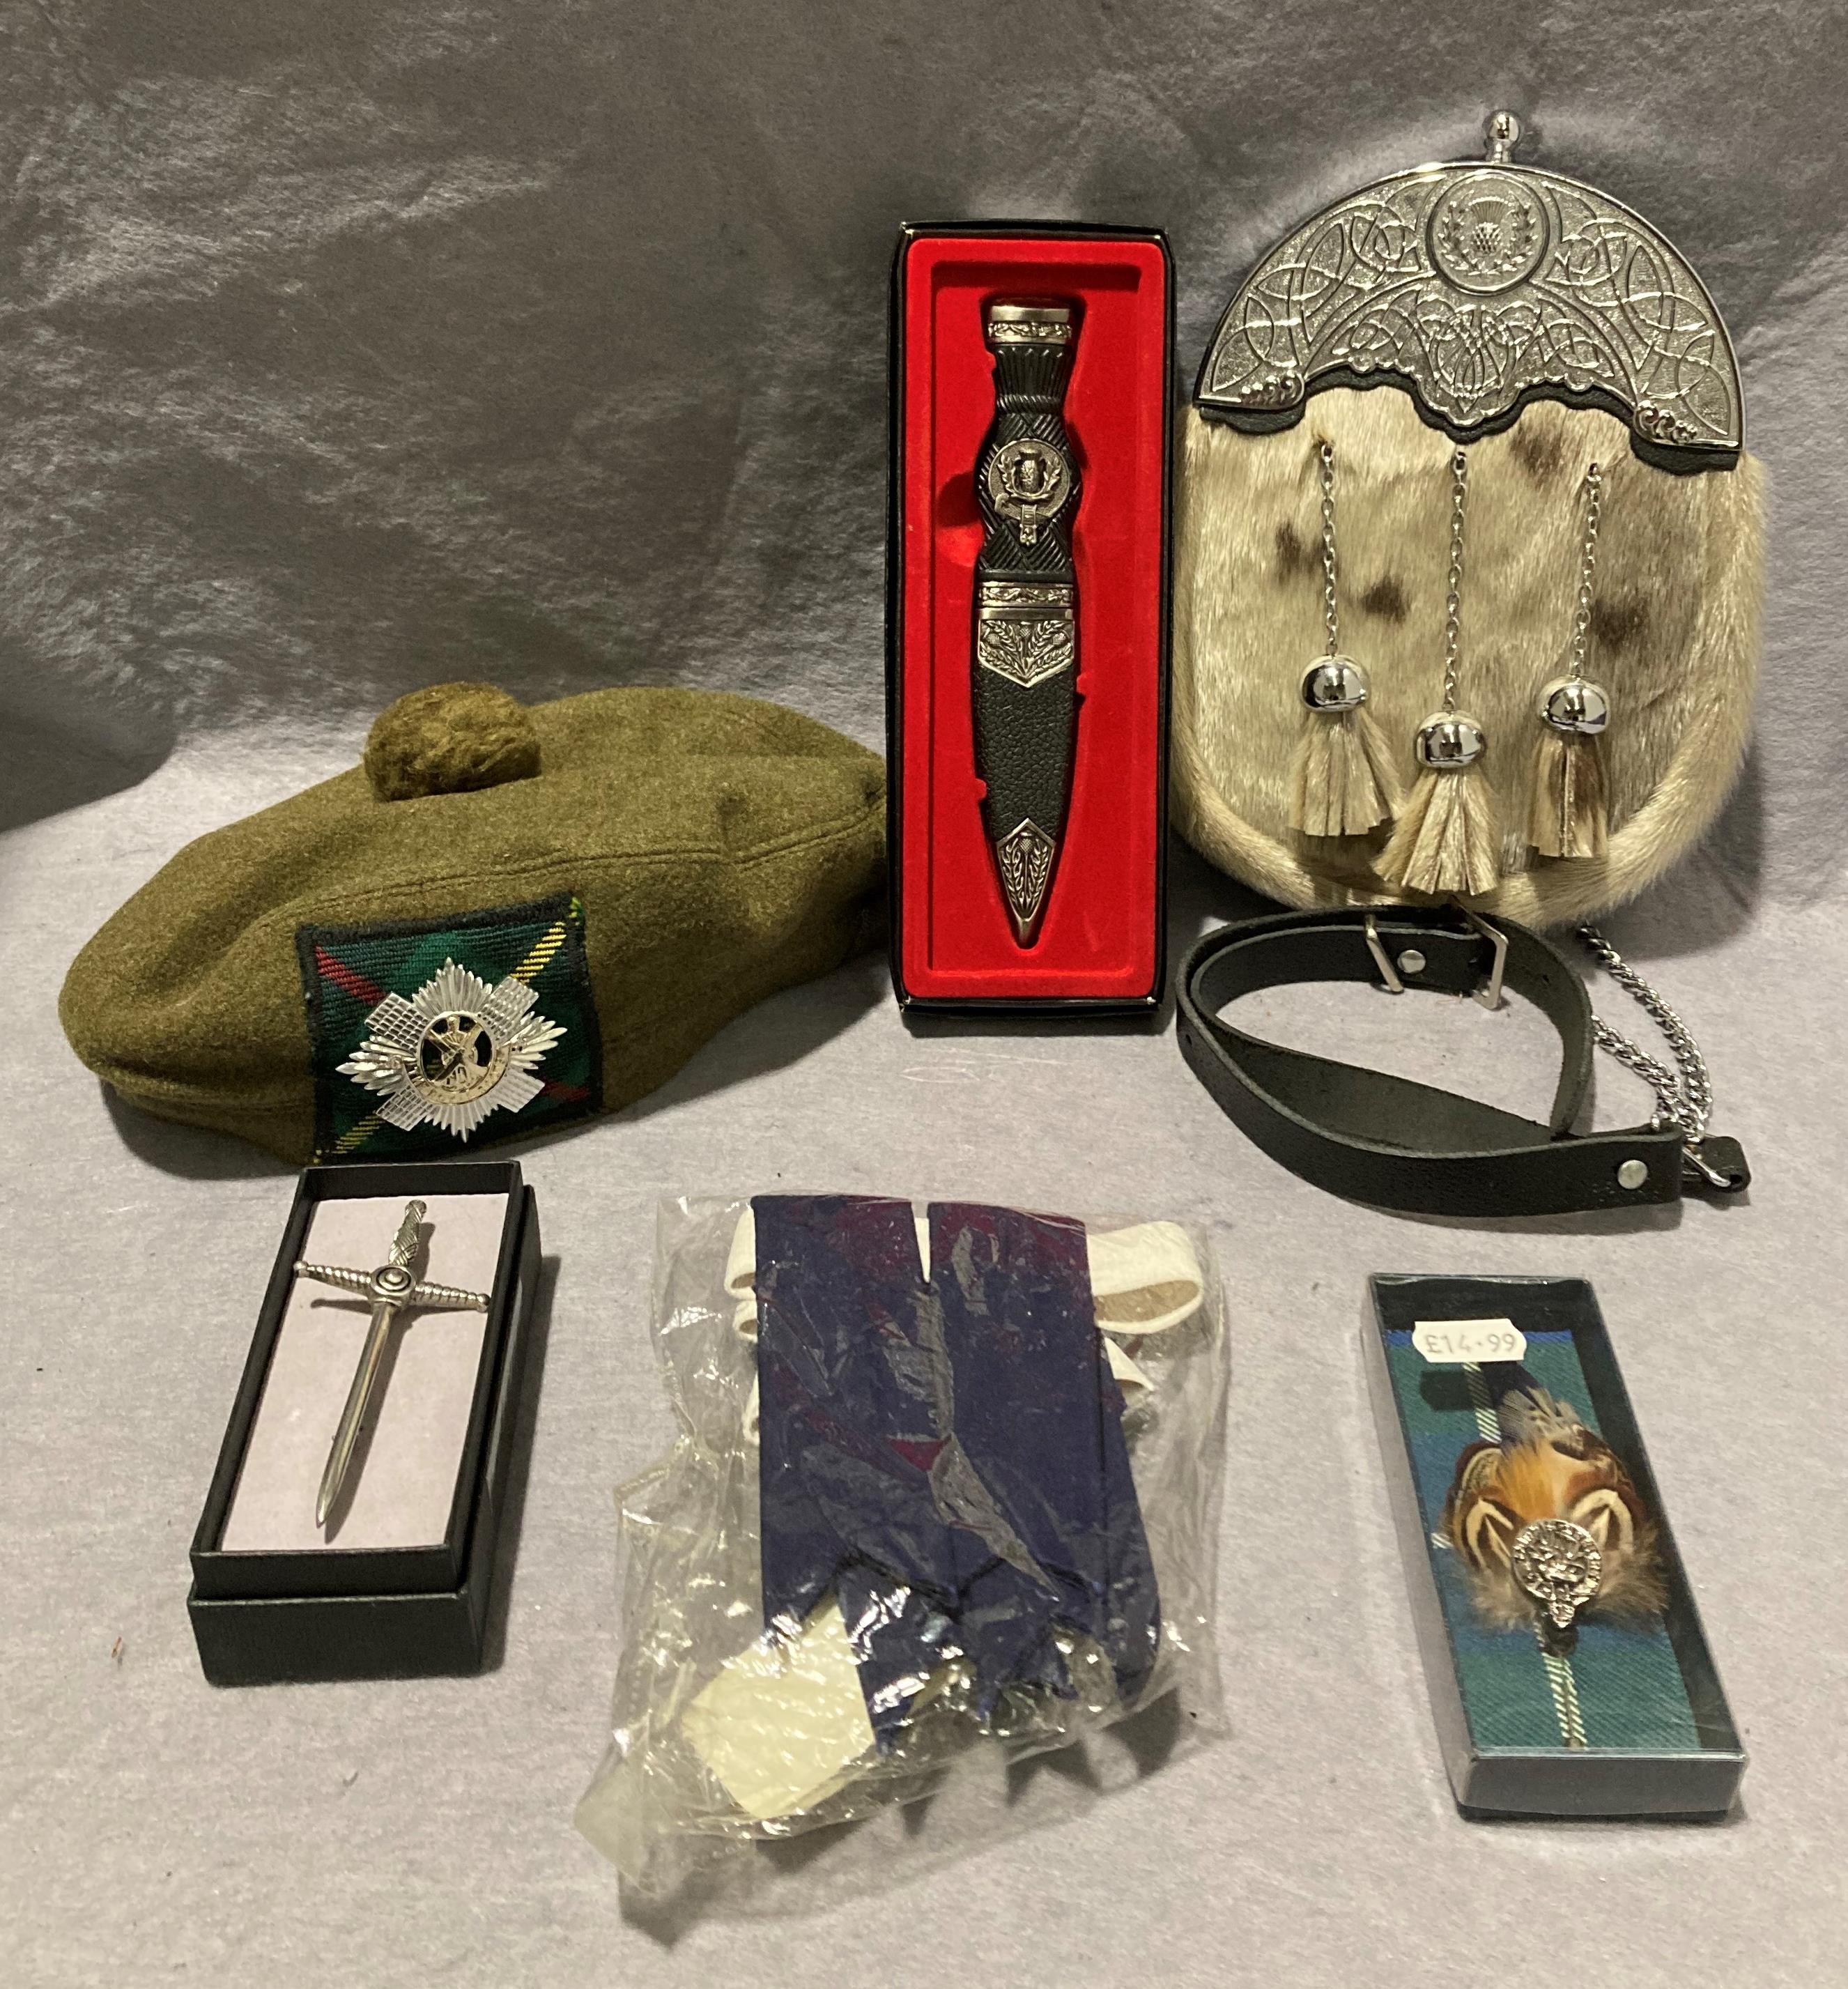 Contents to box - a Greenland seal and real leather Scottish sporran, sword kilt pin,